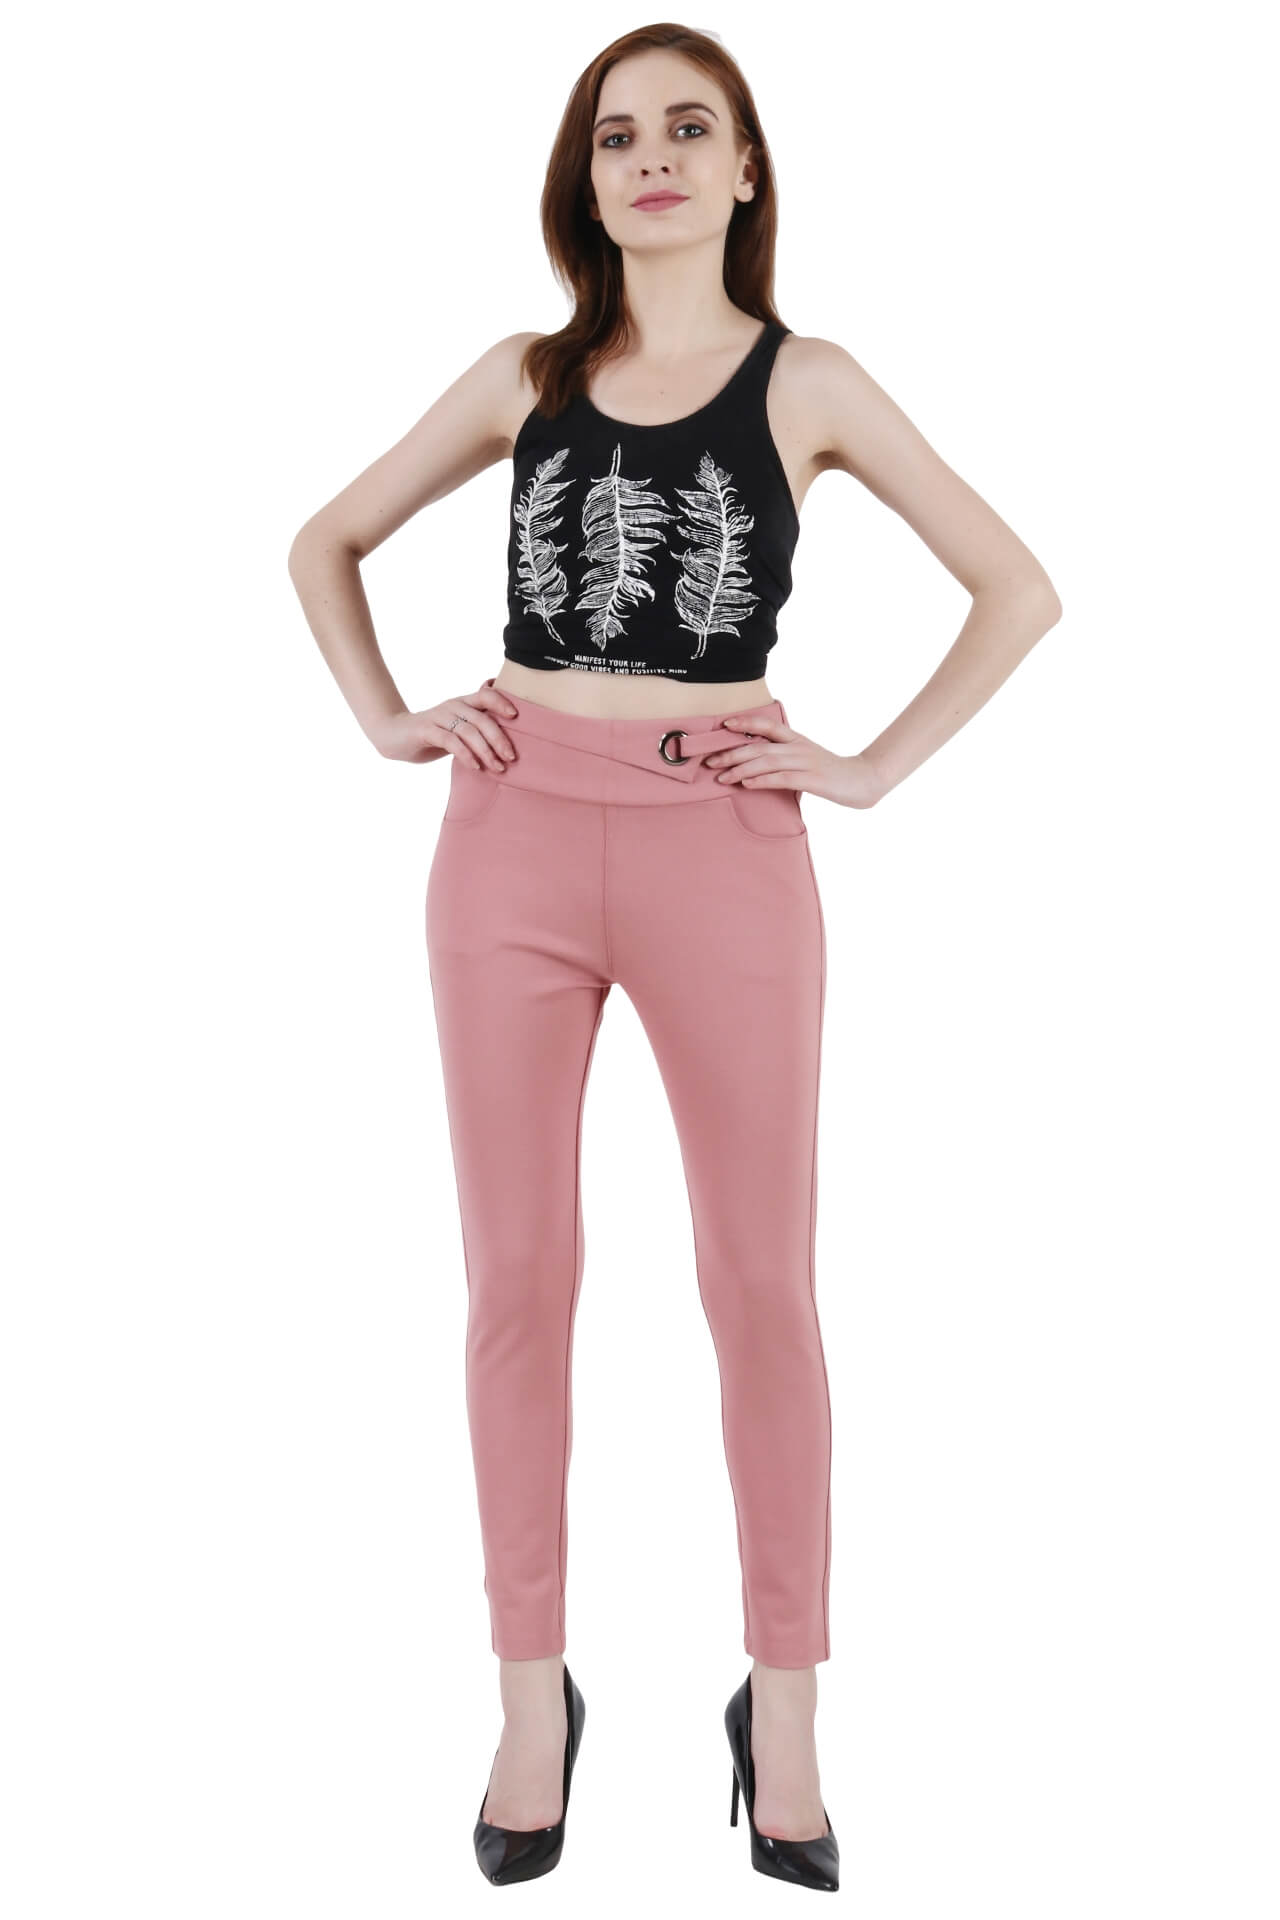 Jeggings for women girls stylish and latest design